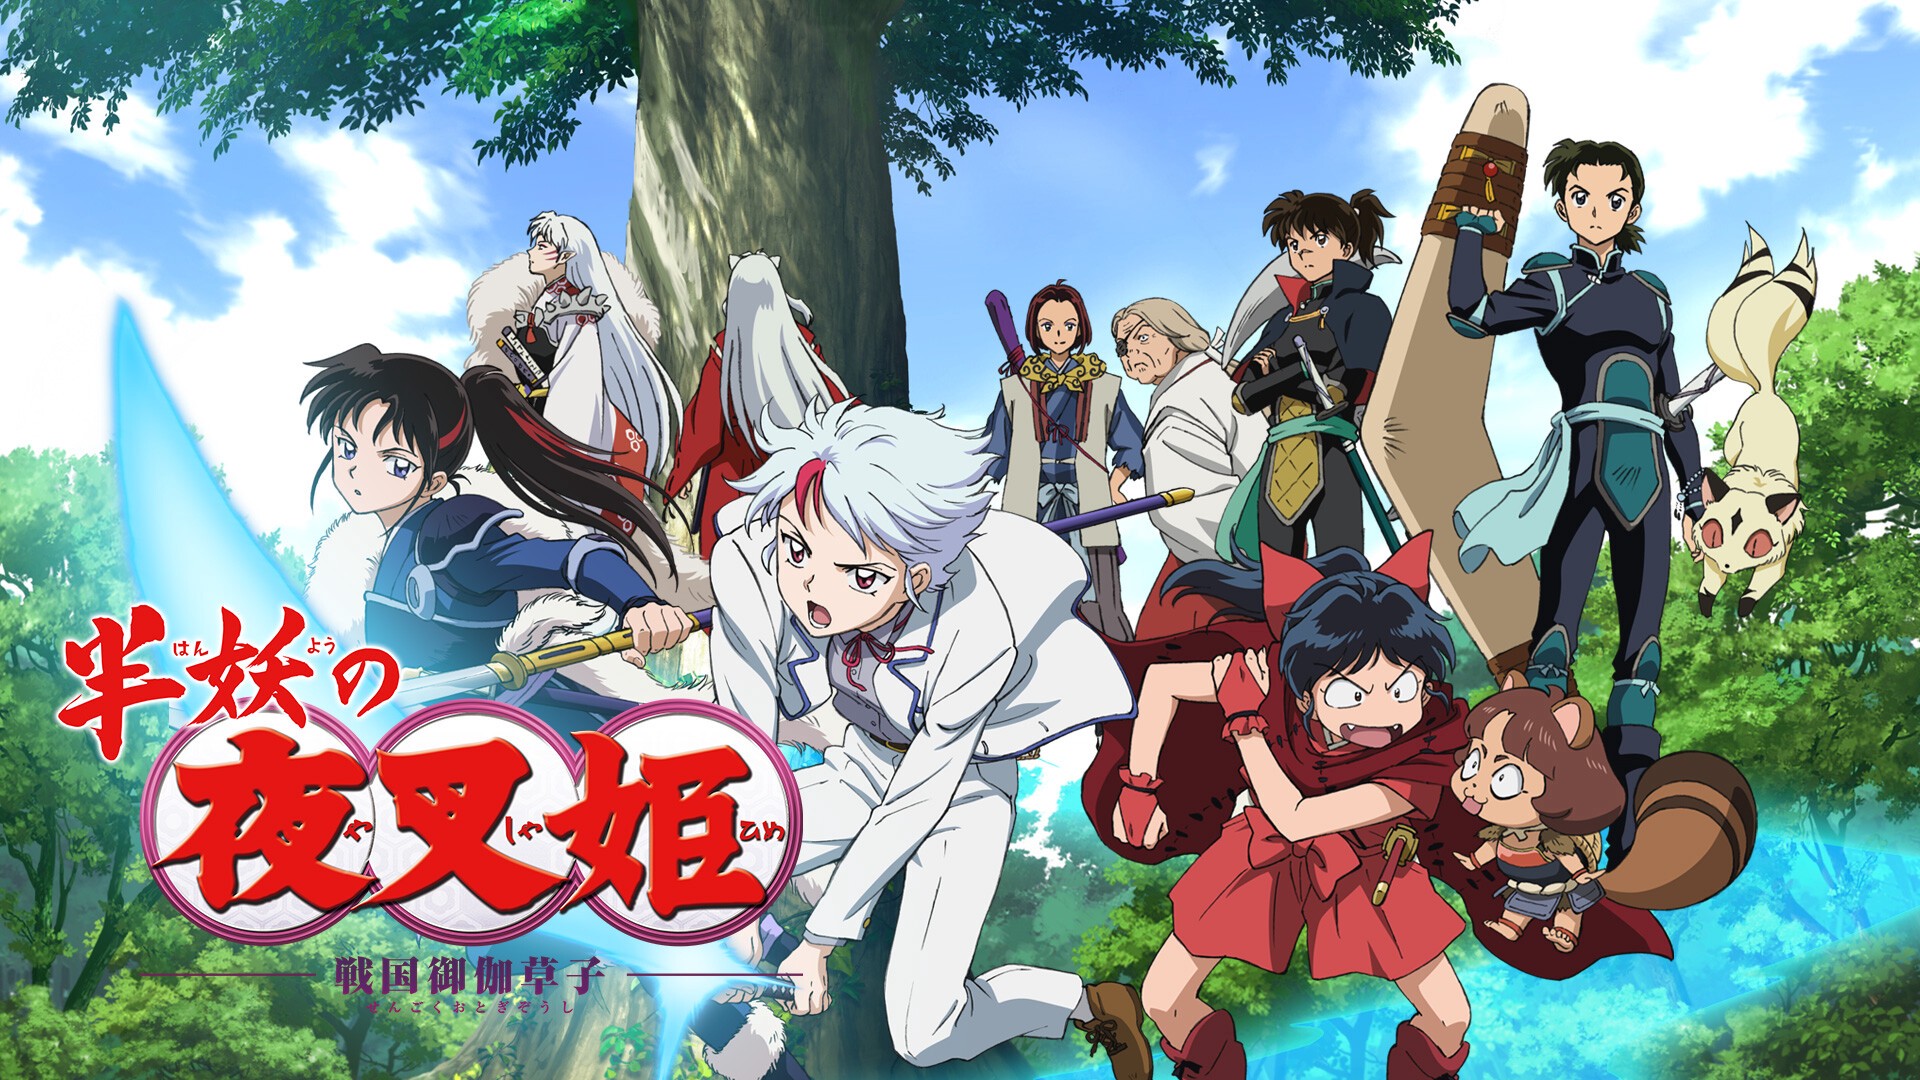 Yashahime Is Finally Giving 'InuYasha' Fans What They Want